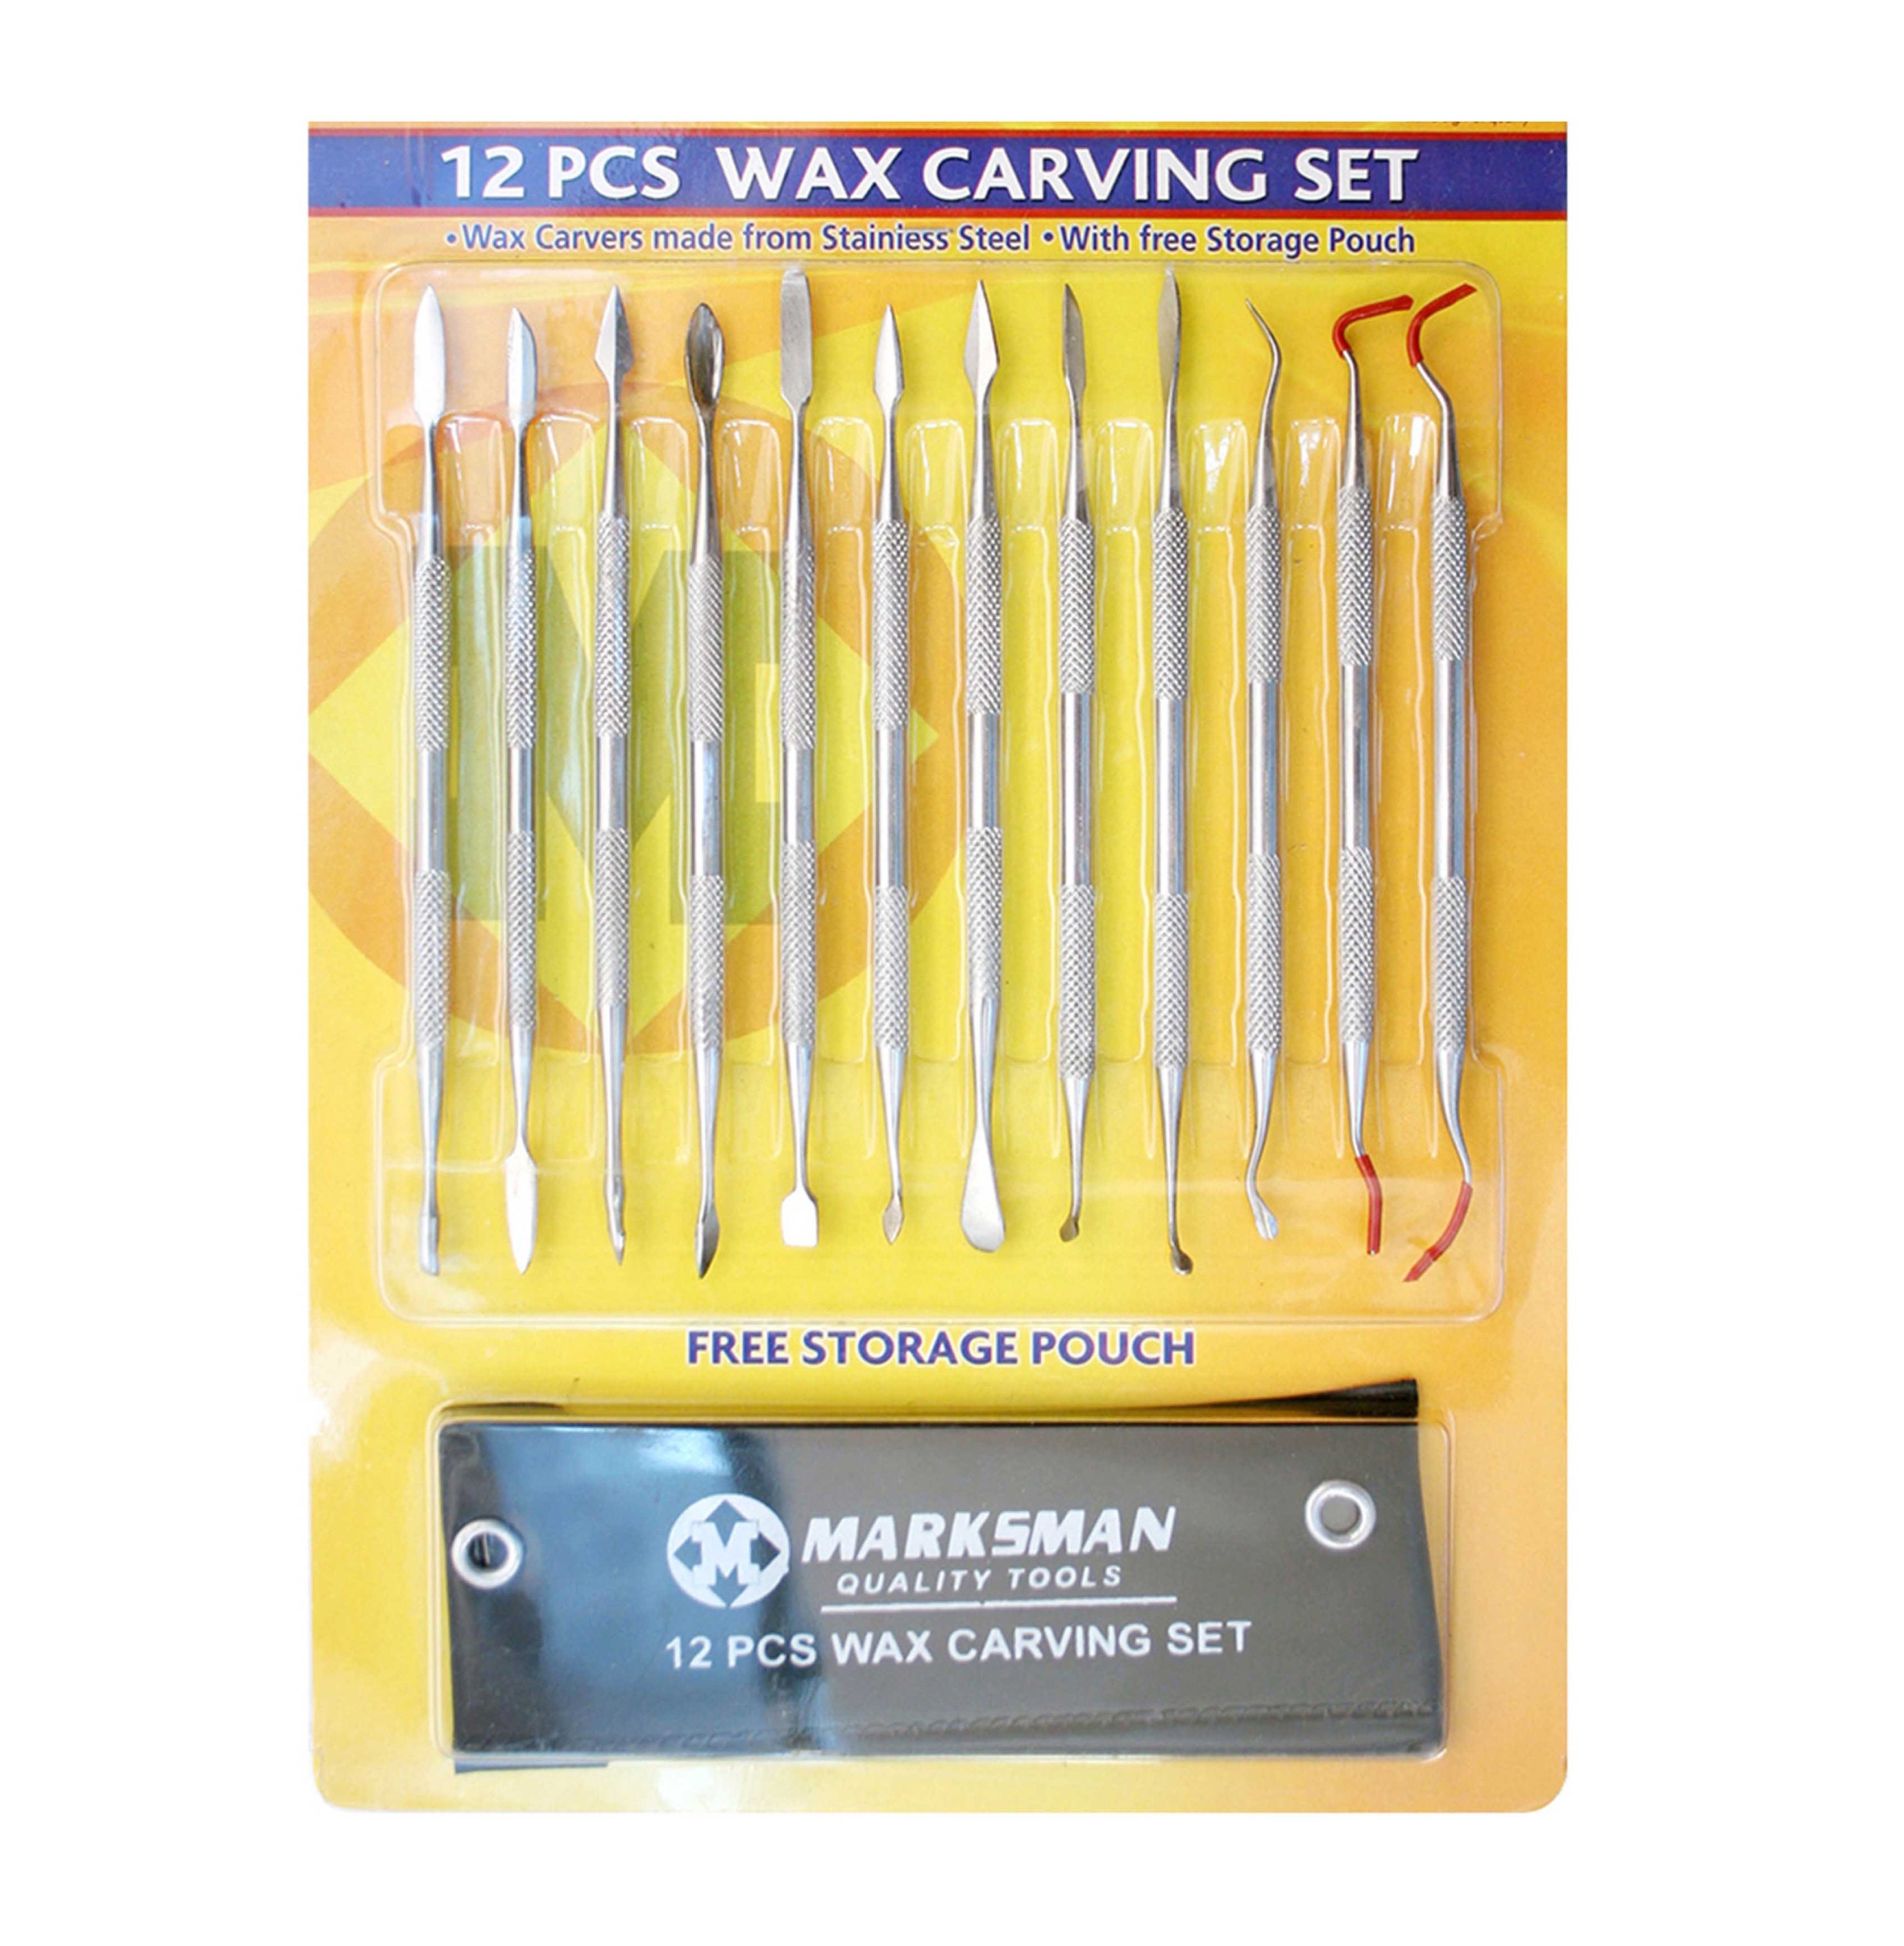 Wax Carving Set of 10 Carvers Tools Jewelry Model Making Candles